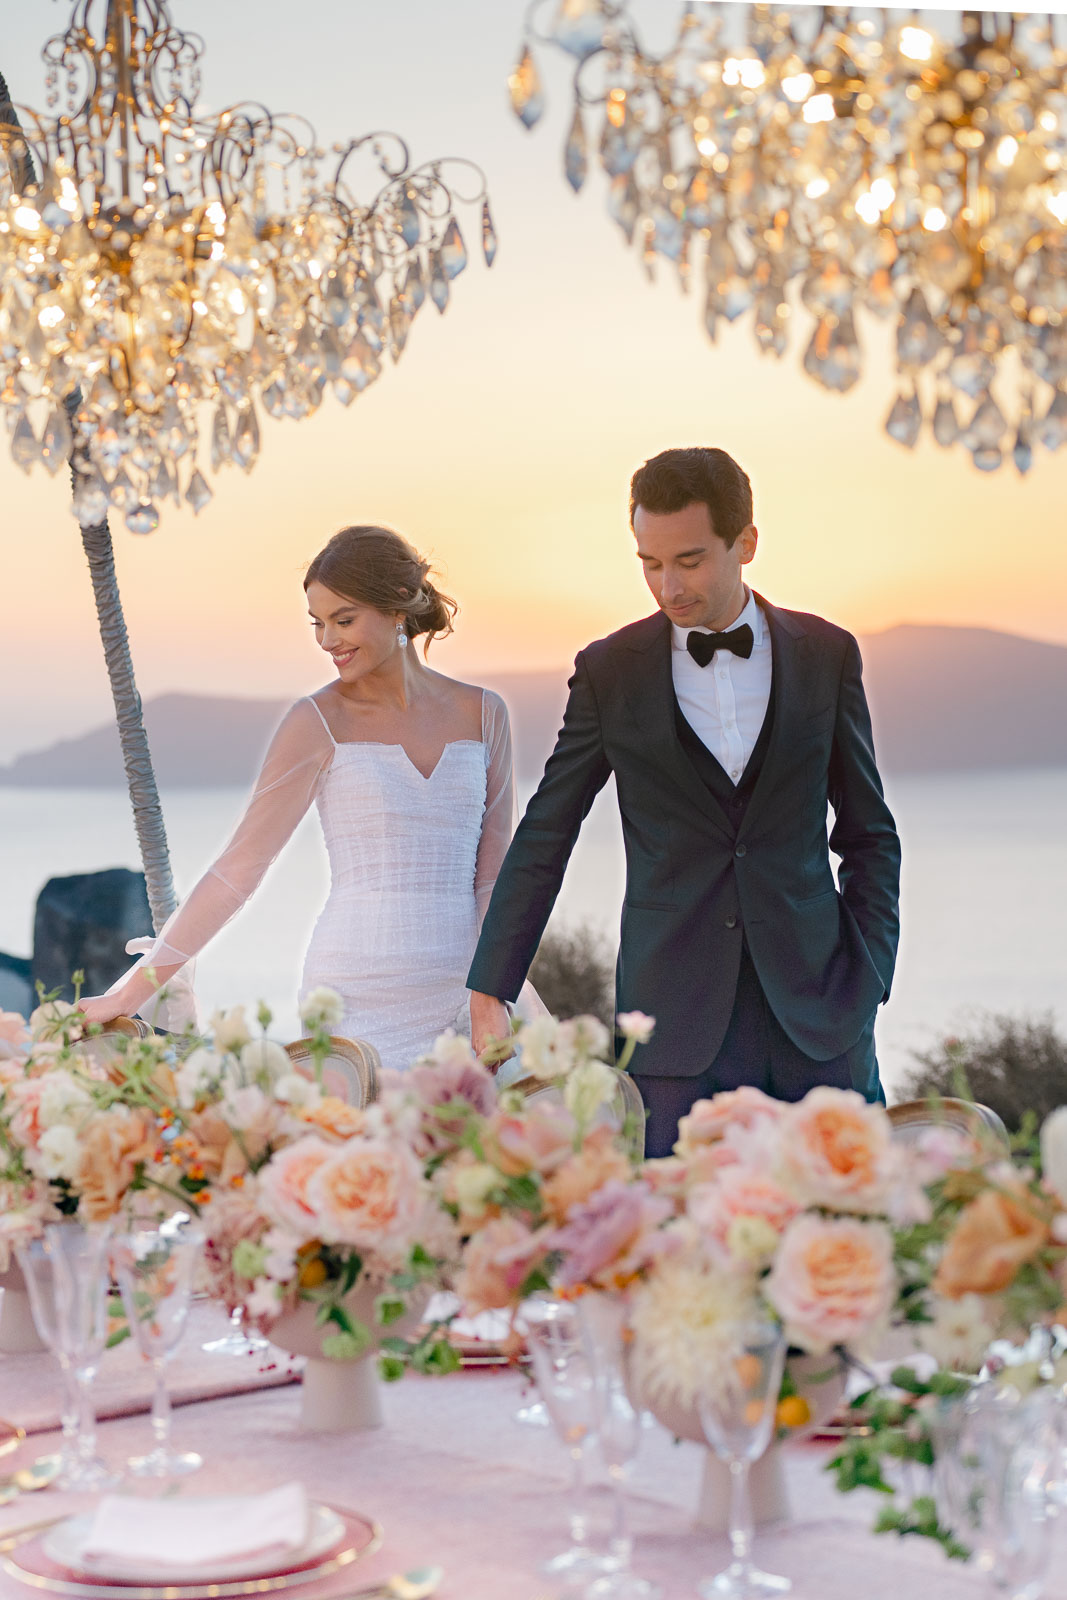 A Beautiful Bride and Groom at Sunset in Greece at their wedding reception.